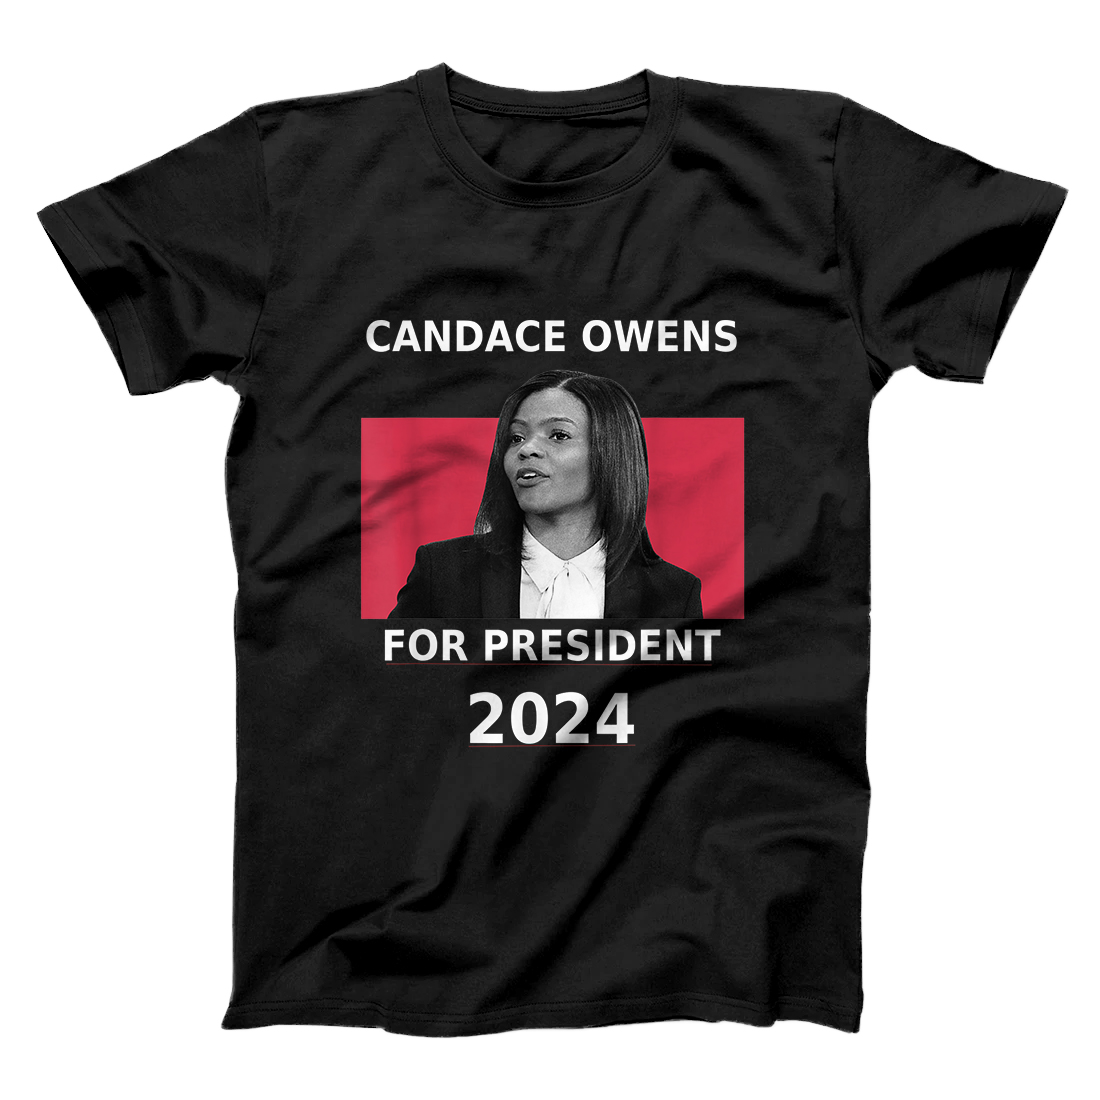 Personalized Candace Owens - For President 2024 T-Shirt